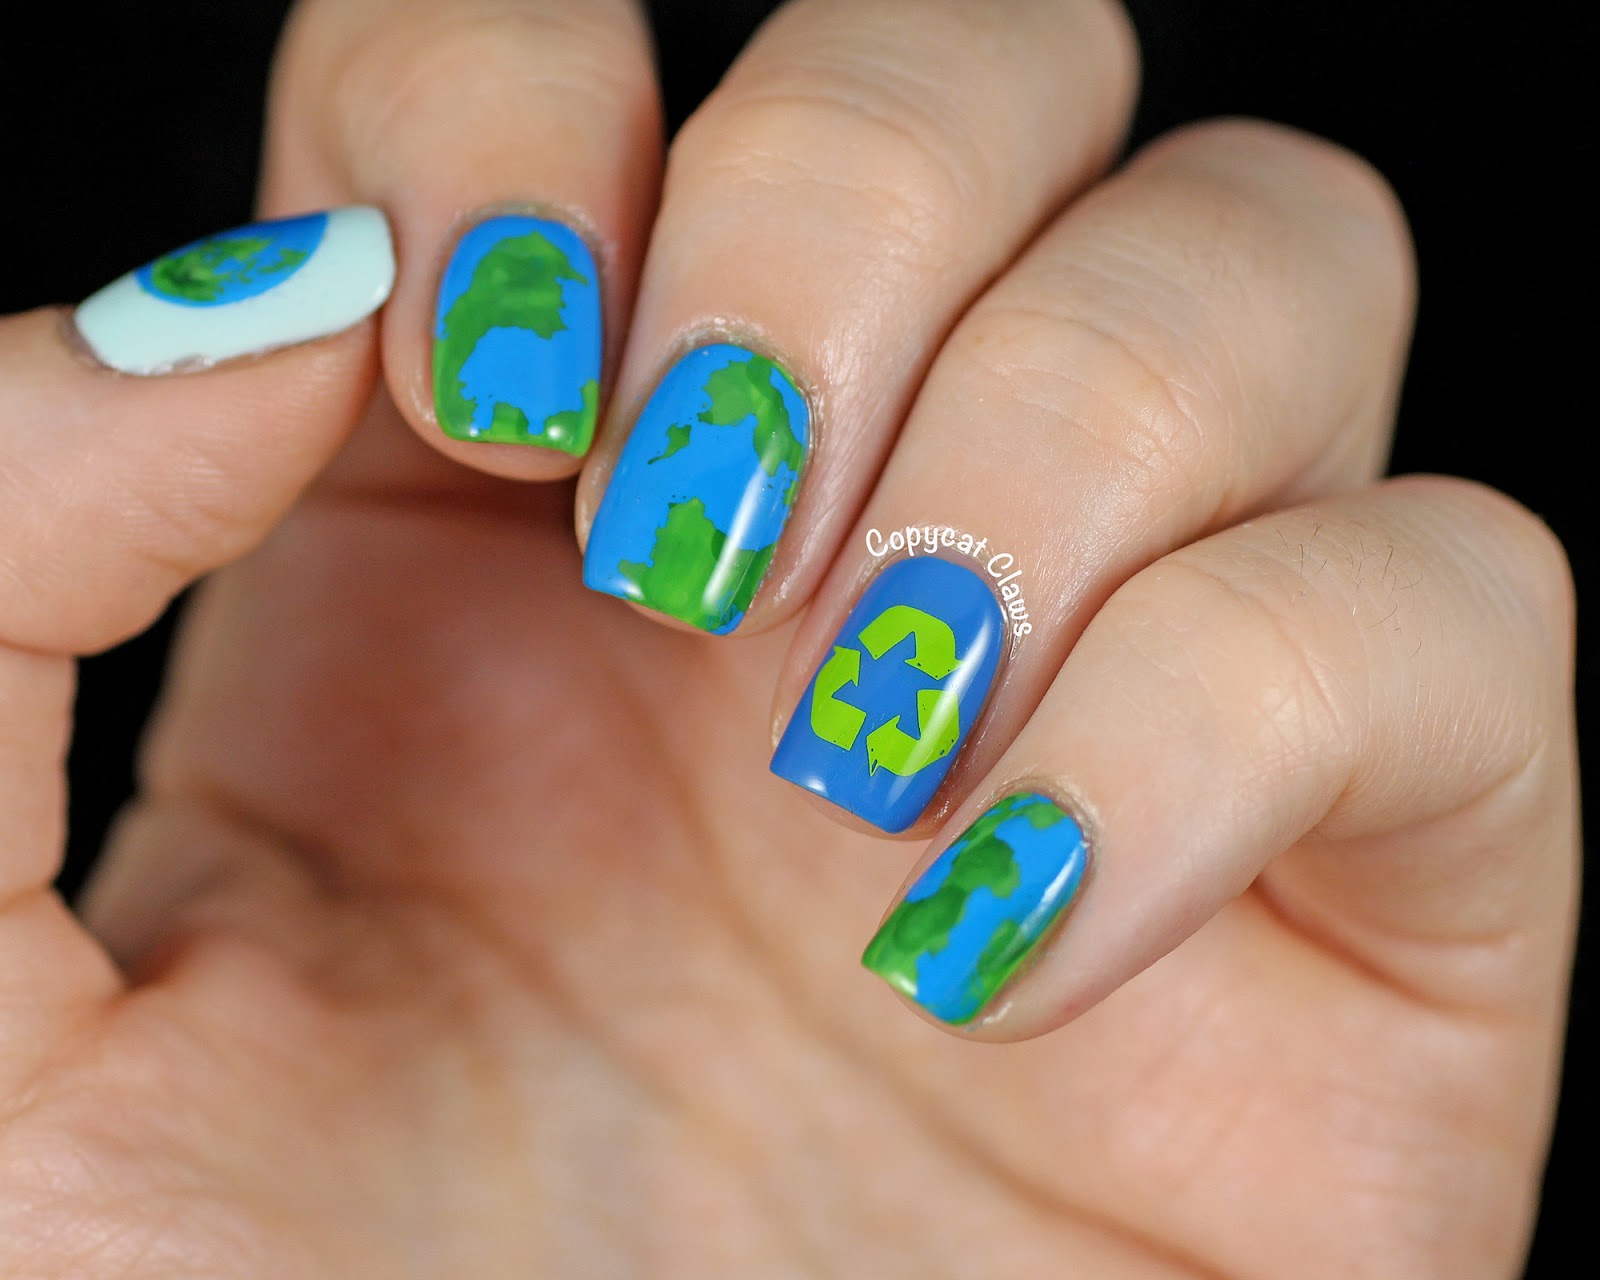 7. "Danny Seo's Nail Polish Art for Earth Day" - wide 4